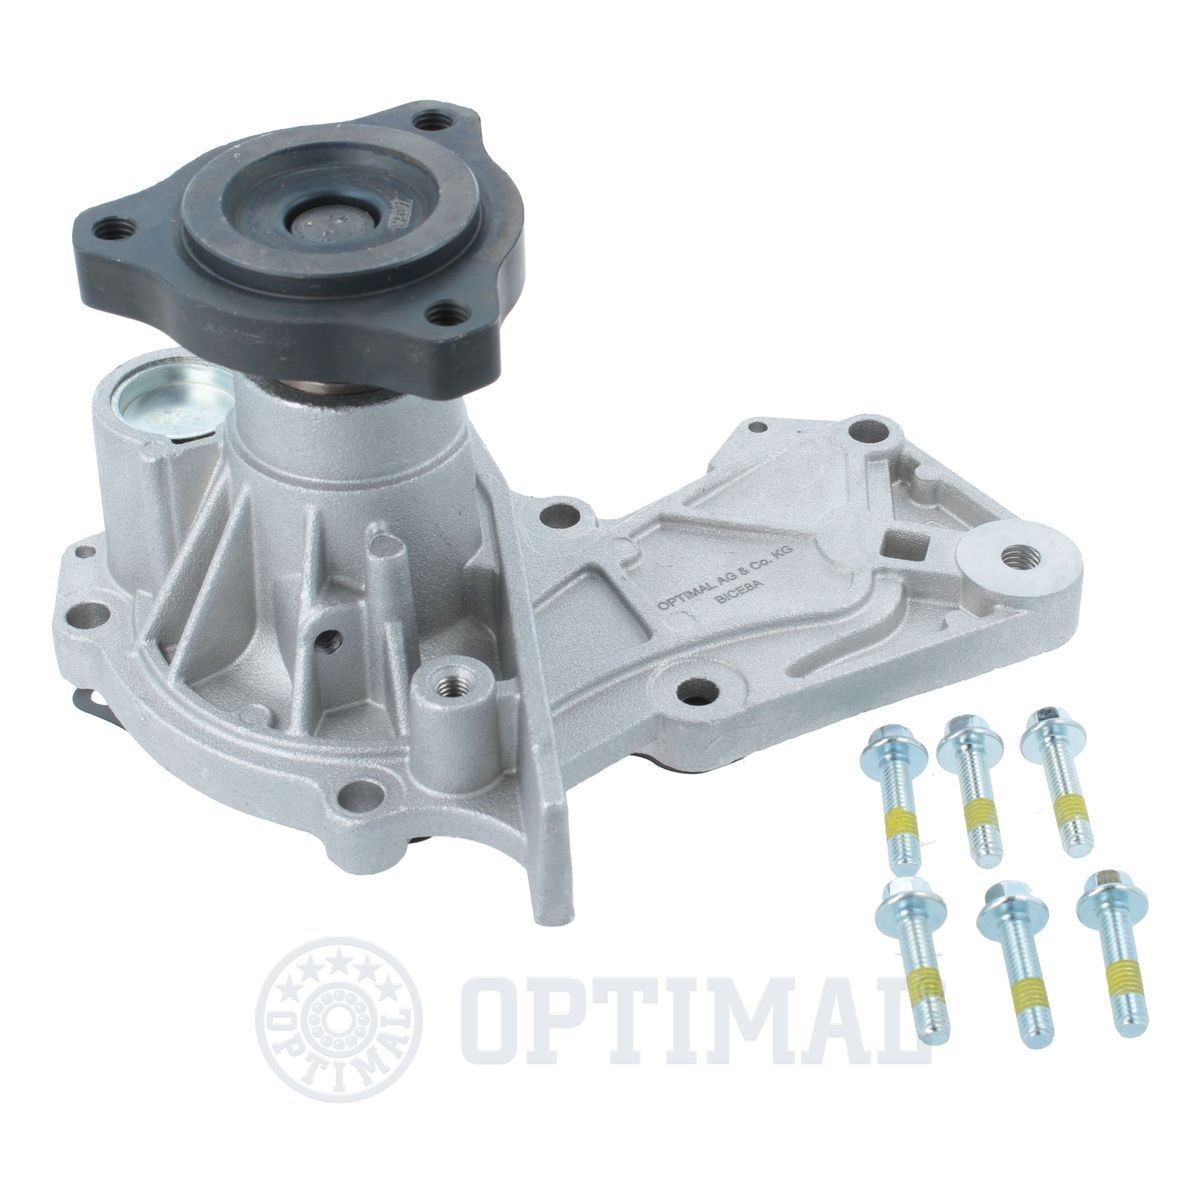 OPTIMAL AQ-2515 Water pump with accessories, with seal, Mechanical